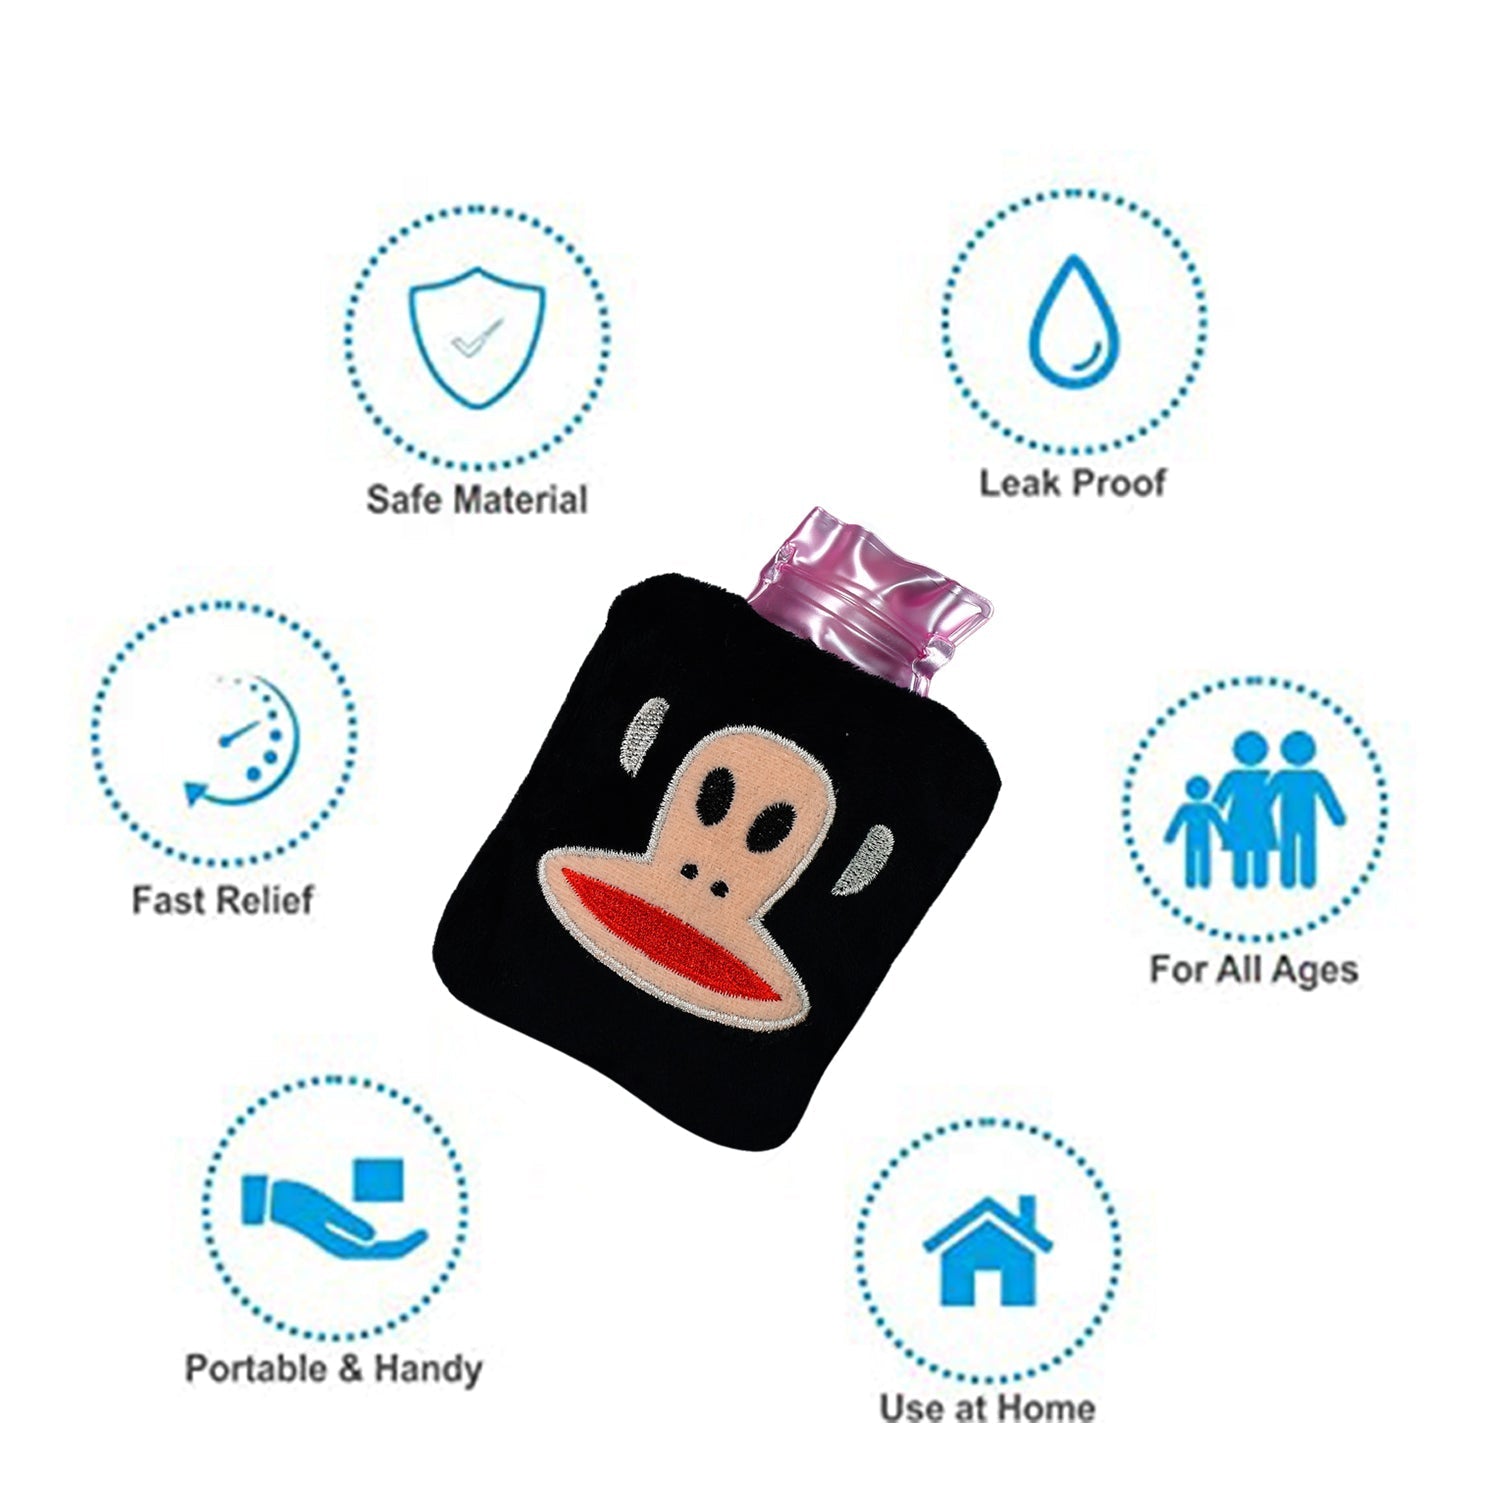 6522 Black Monkey small Hot Water Bag with Cover for Pain Relief, Neck, Shoulder Pain and Hand, Feet Warmer, Menstrual Cramps. DeoDap